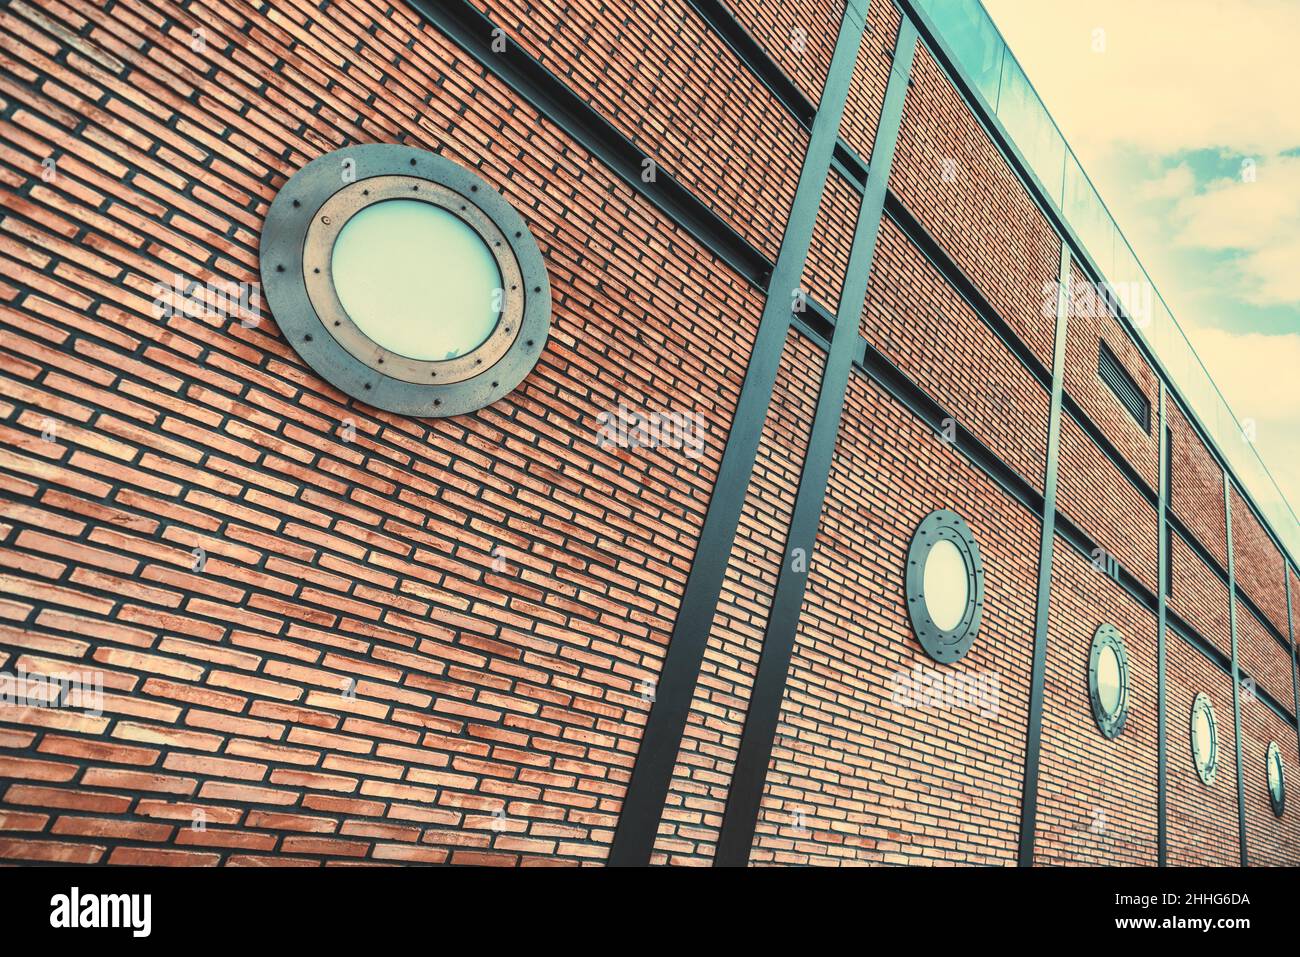 A perspective view of a modern brick wall of a contemporary building with steel beams and futuristic portholes or illuminator windows in a steampunk s Stock Photo